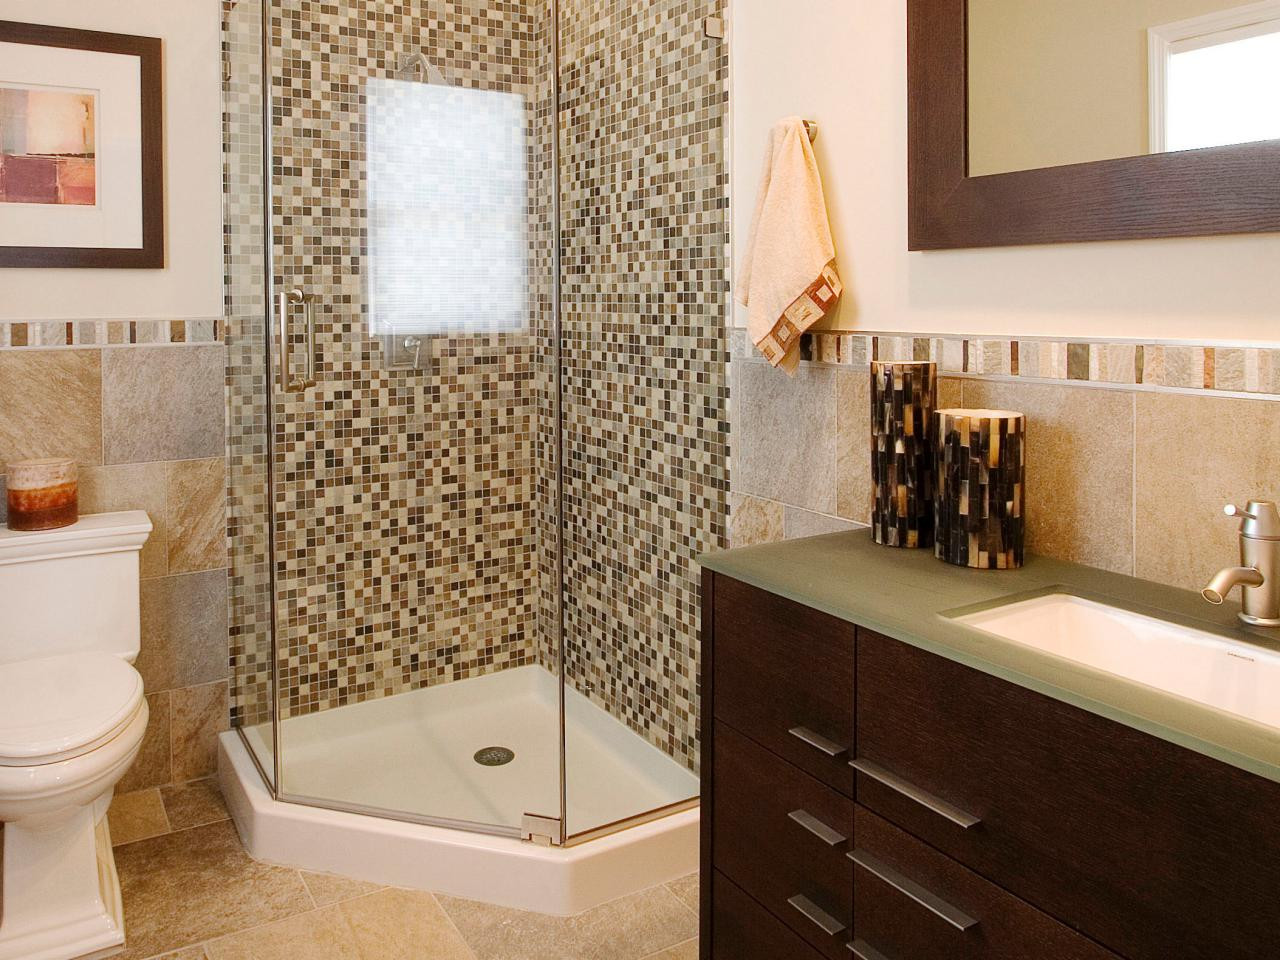 Small Shower Bathroom Ideas
 Tips to Remodel Small Bathroom MidCityEast